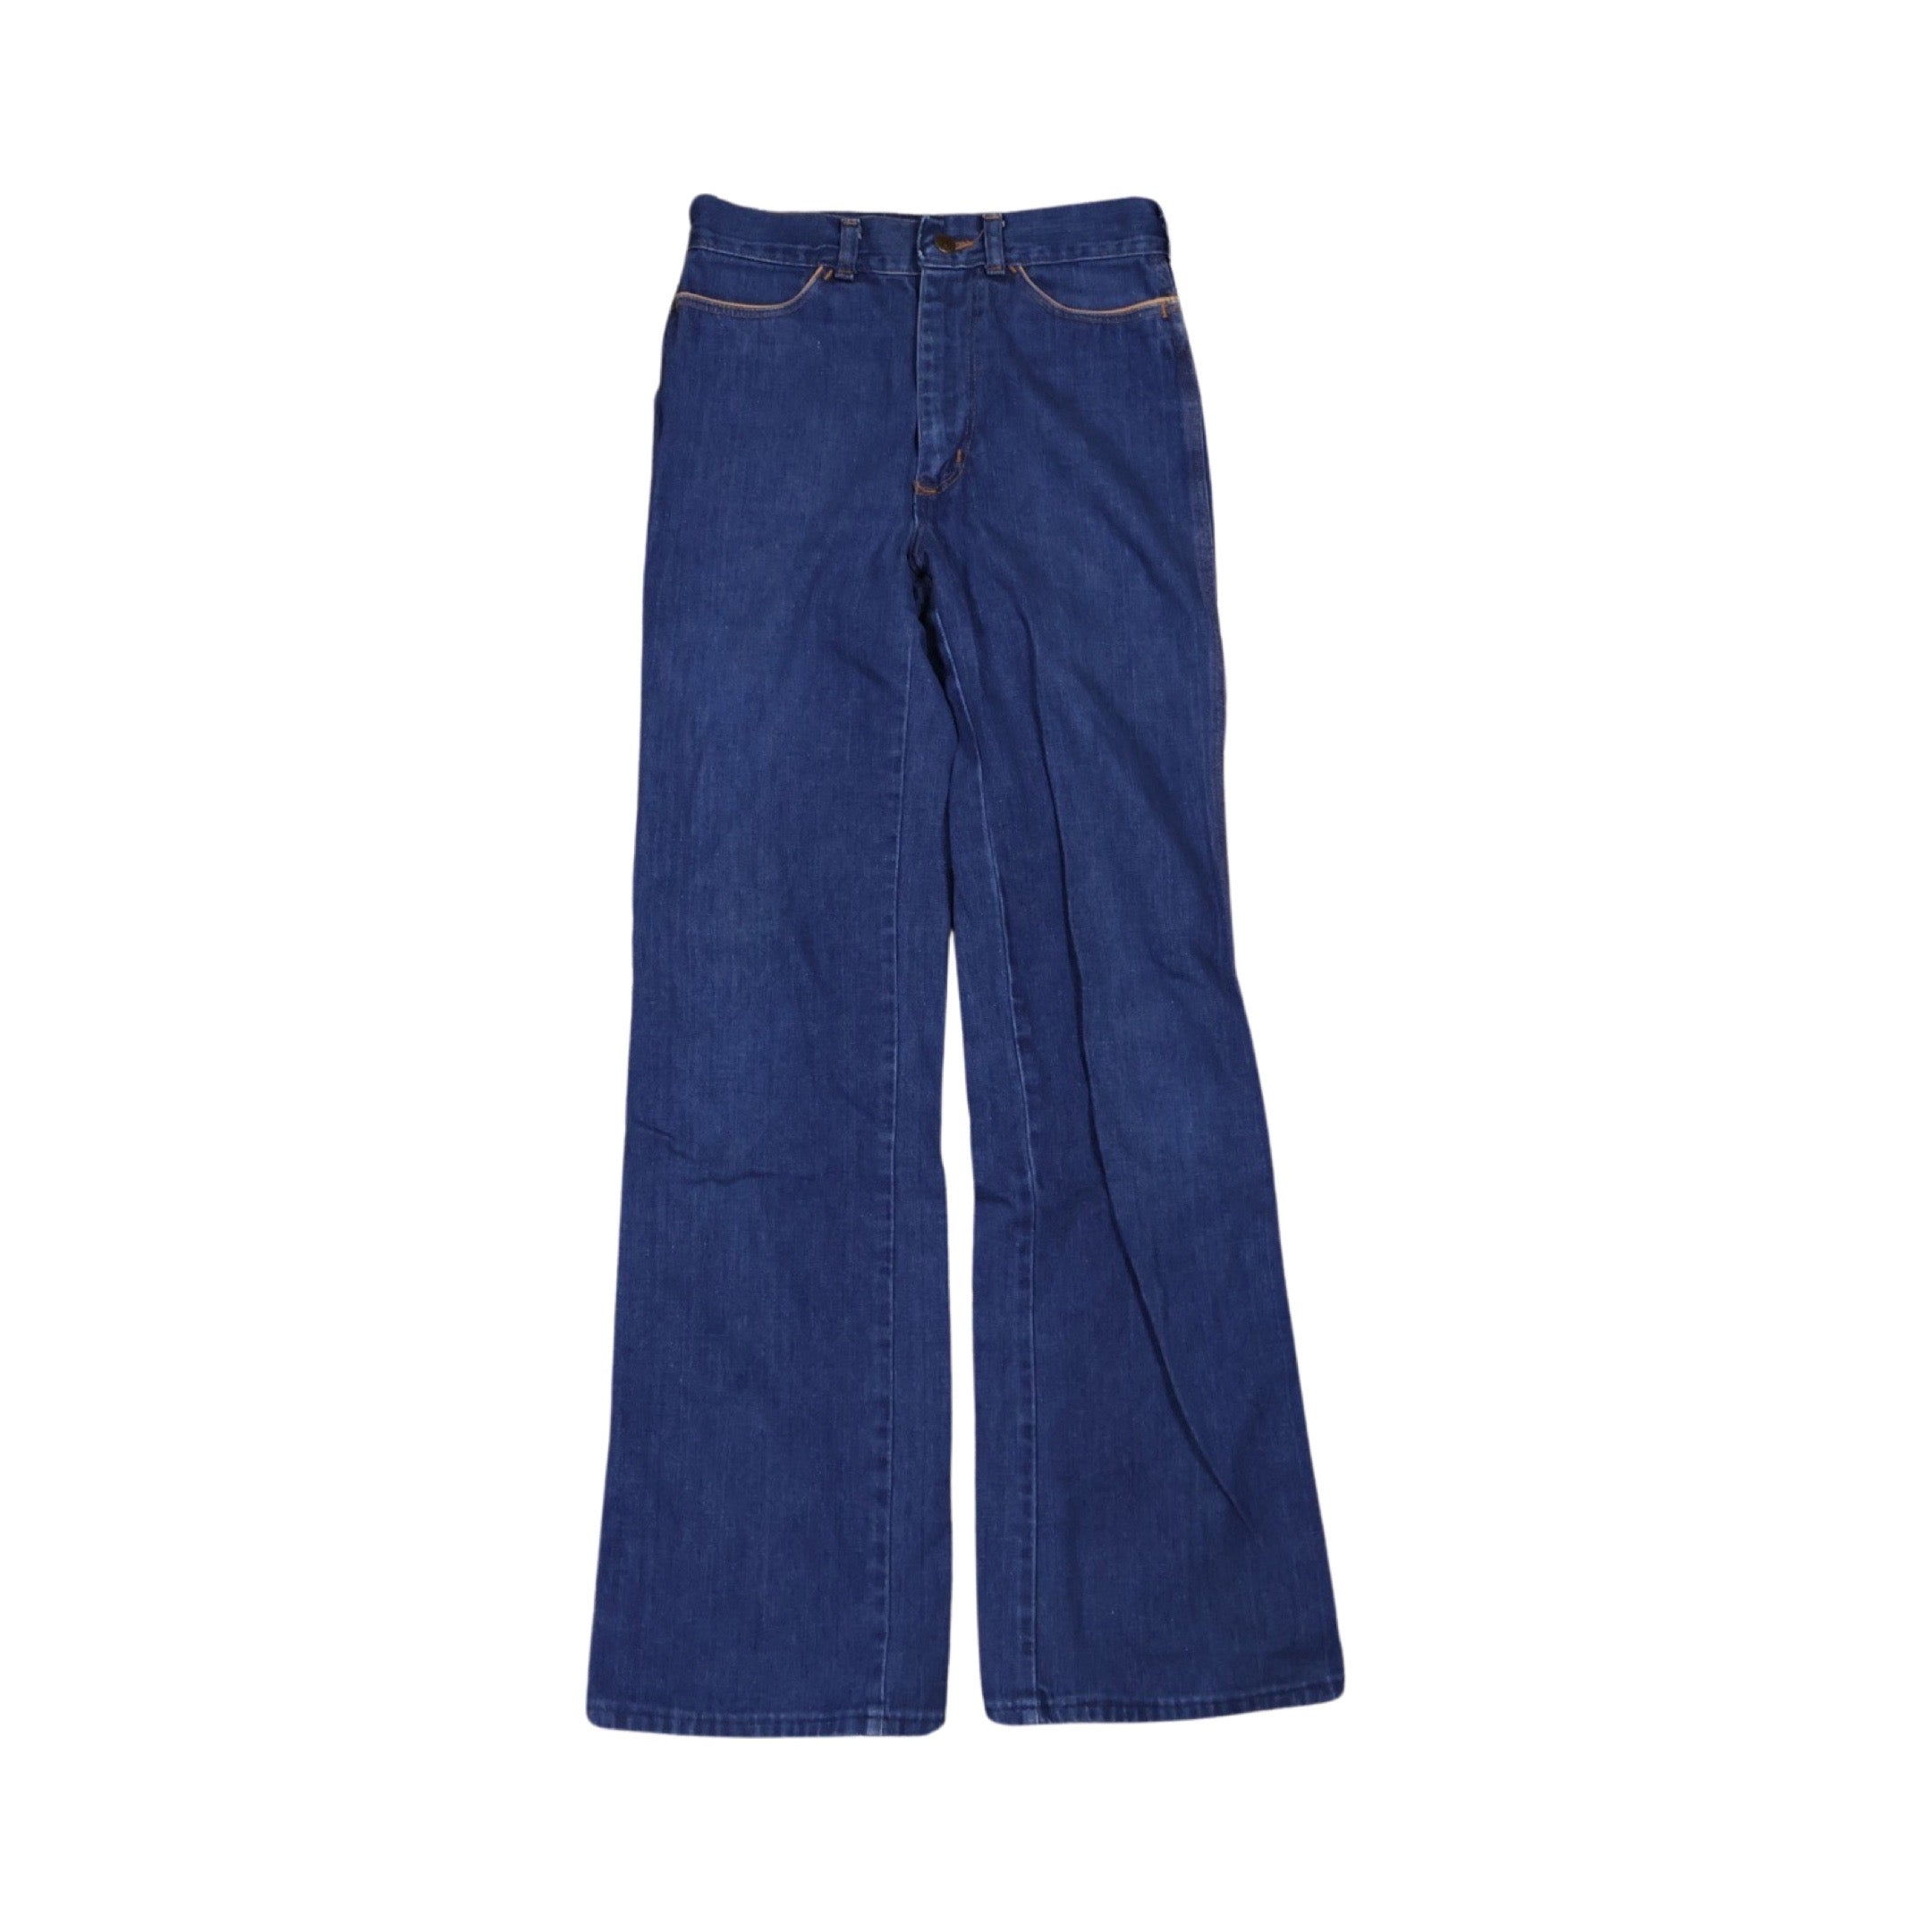 Sedgefield 70s/80s Flare Jeans Essential (27”)